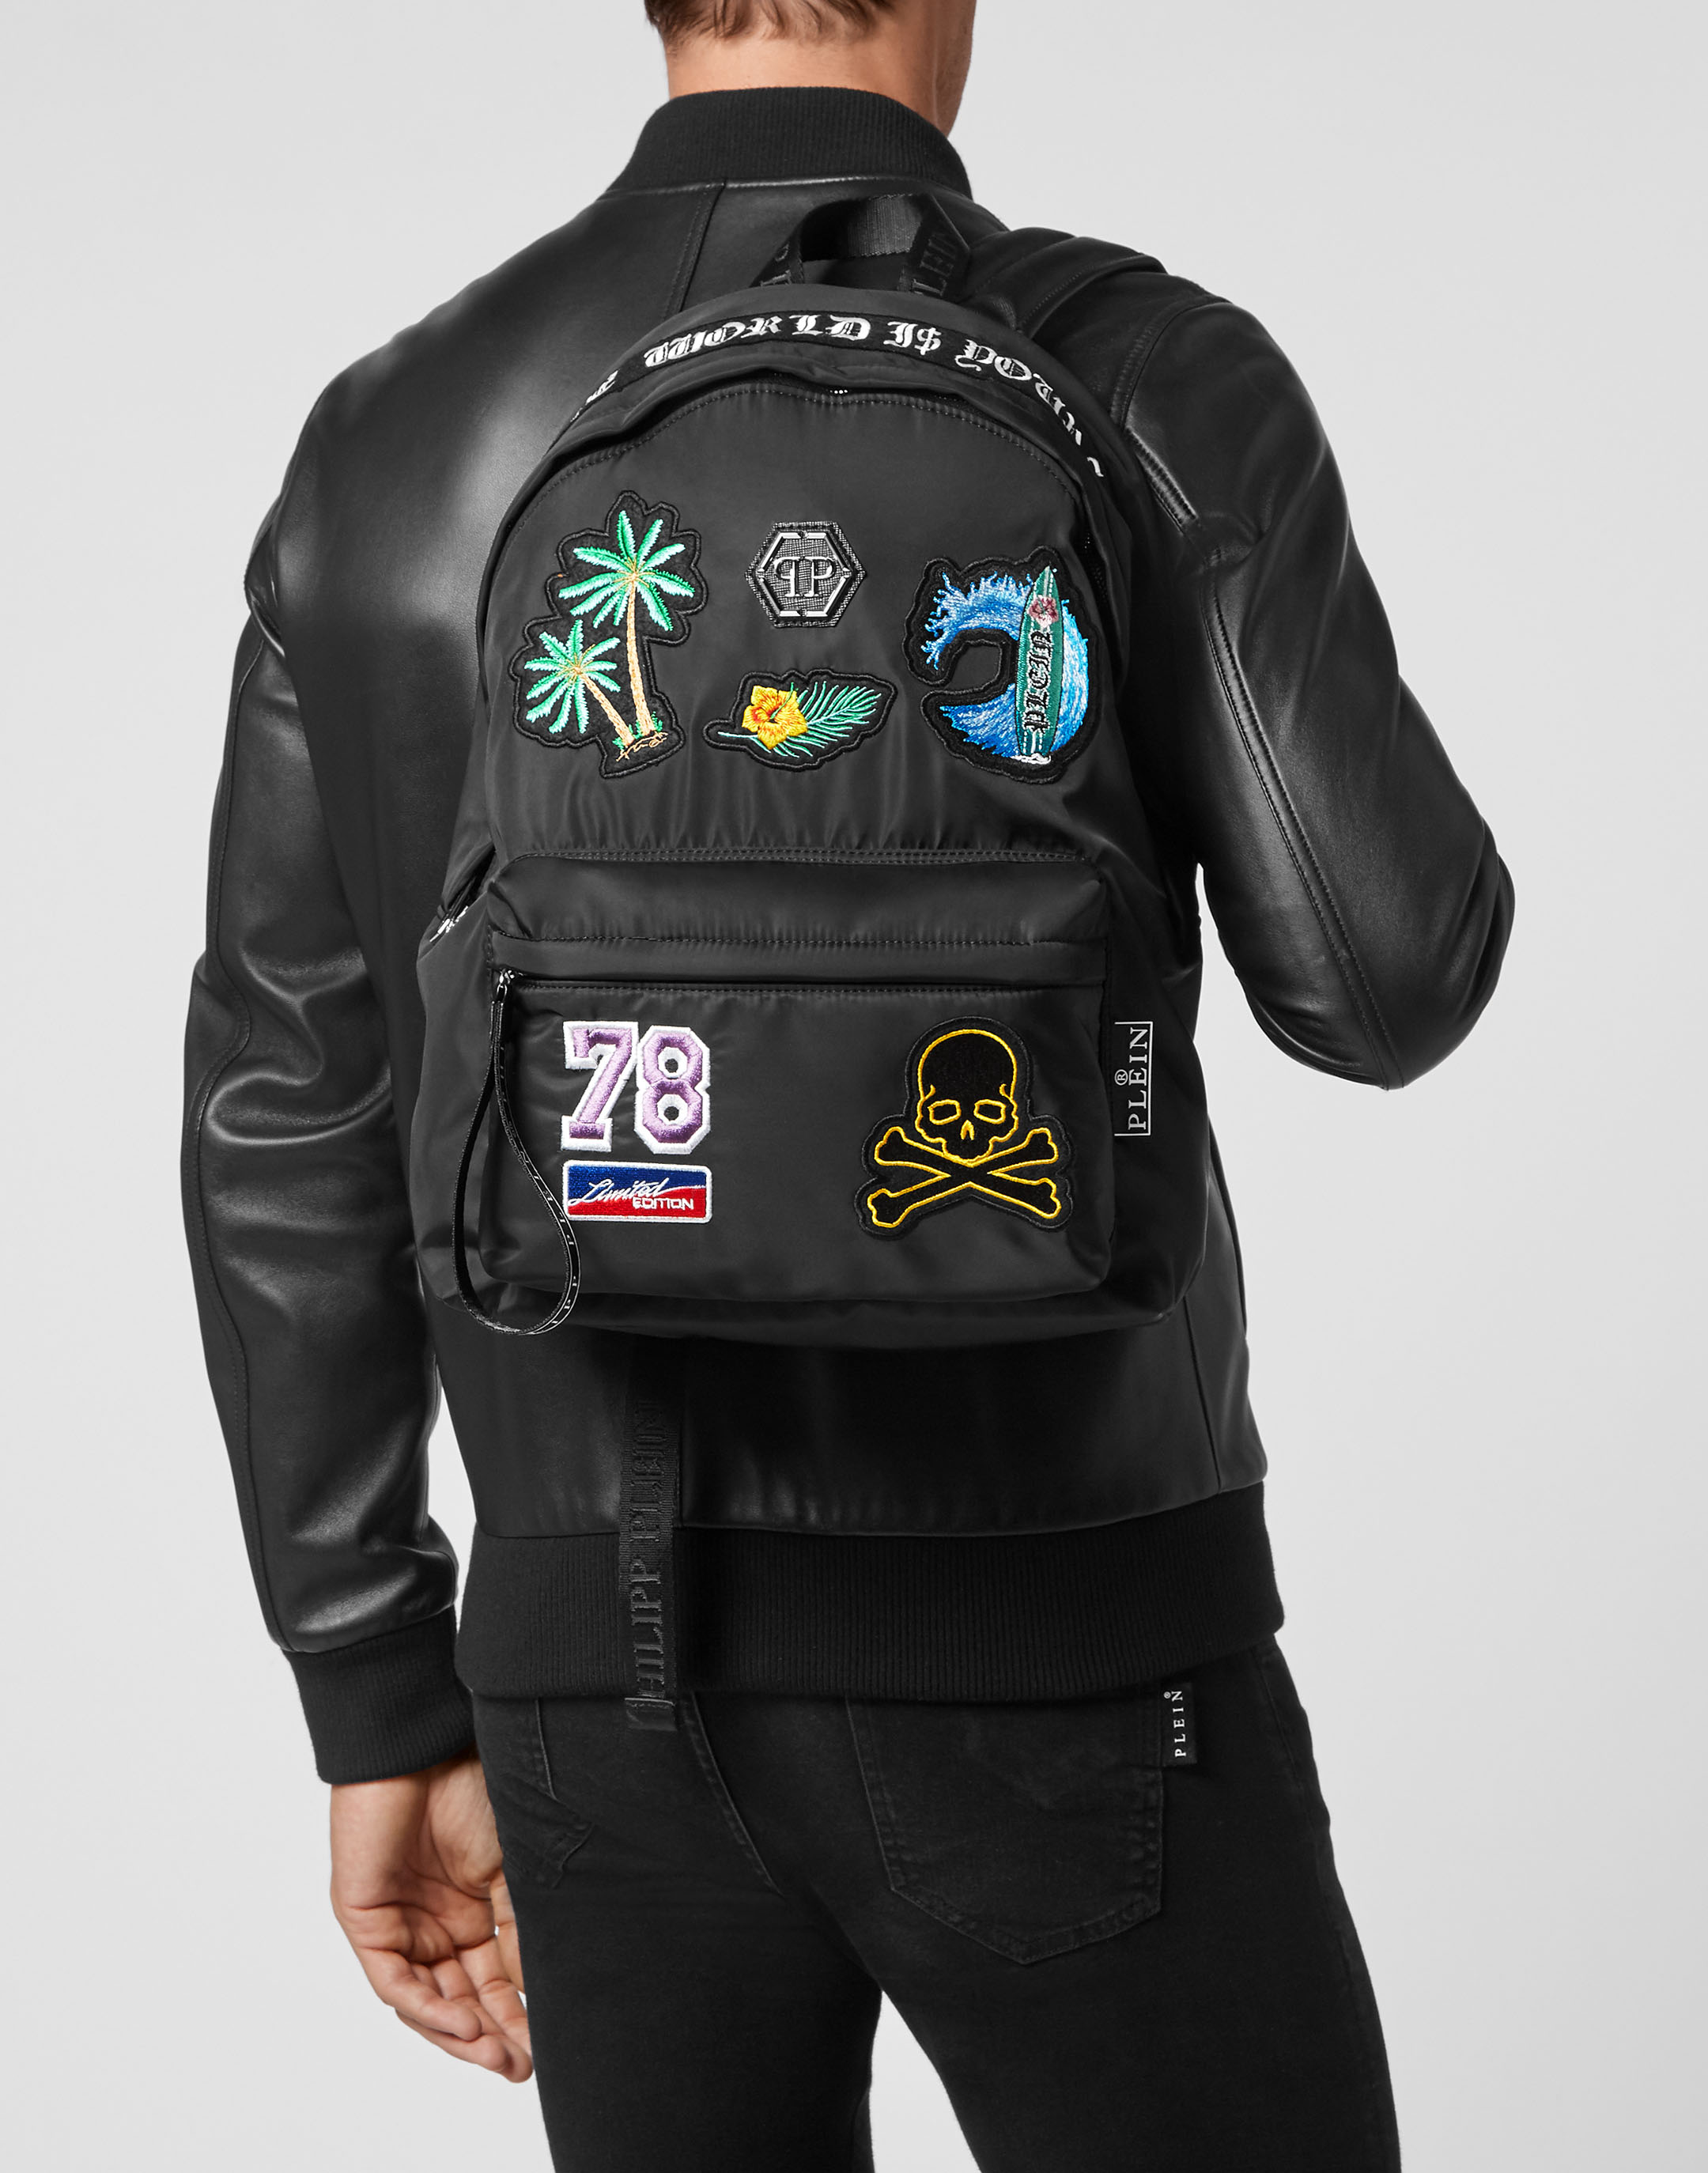 Backpack Patches